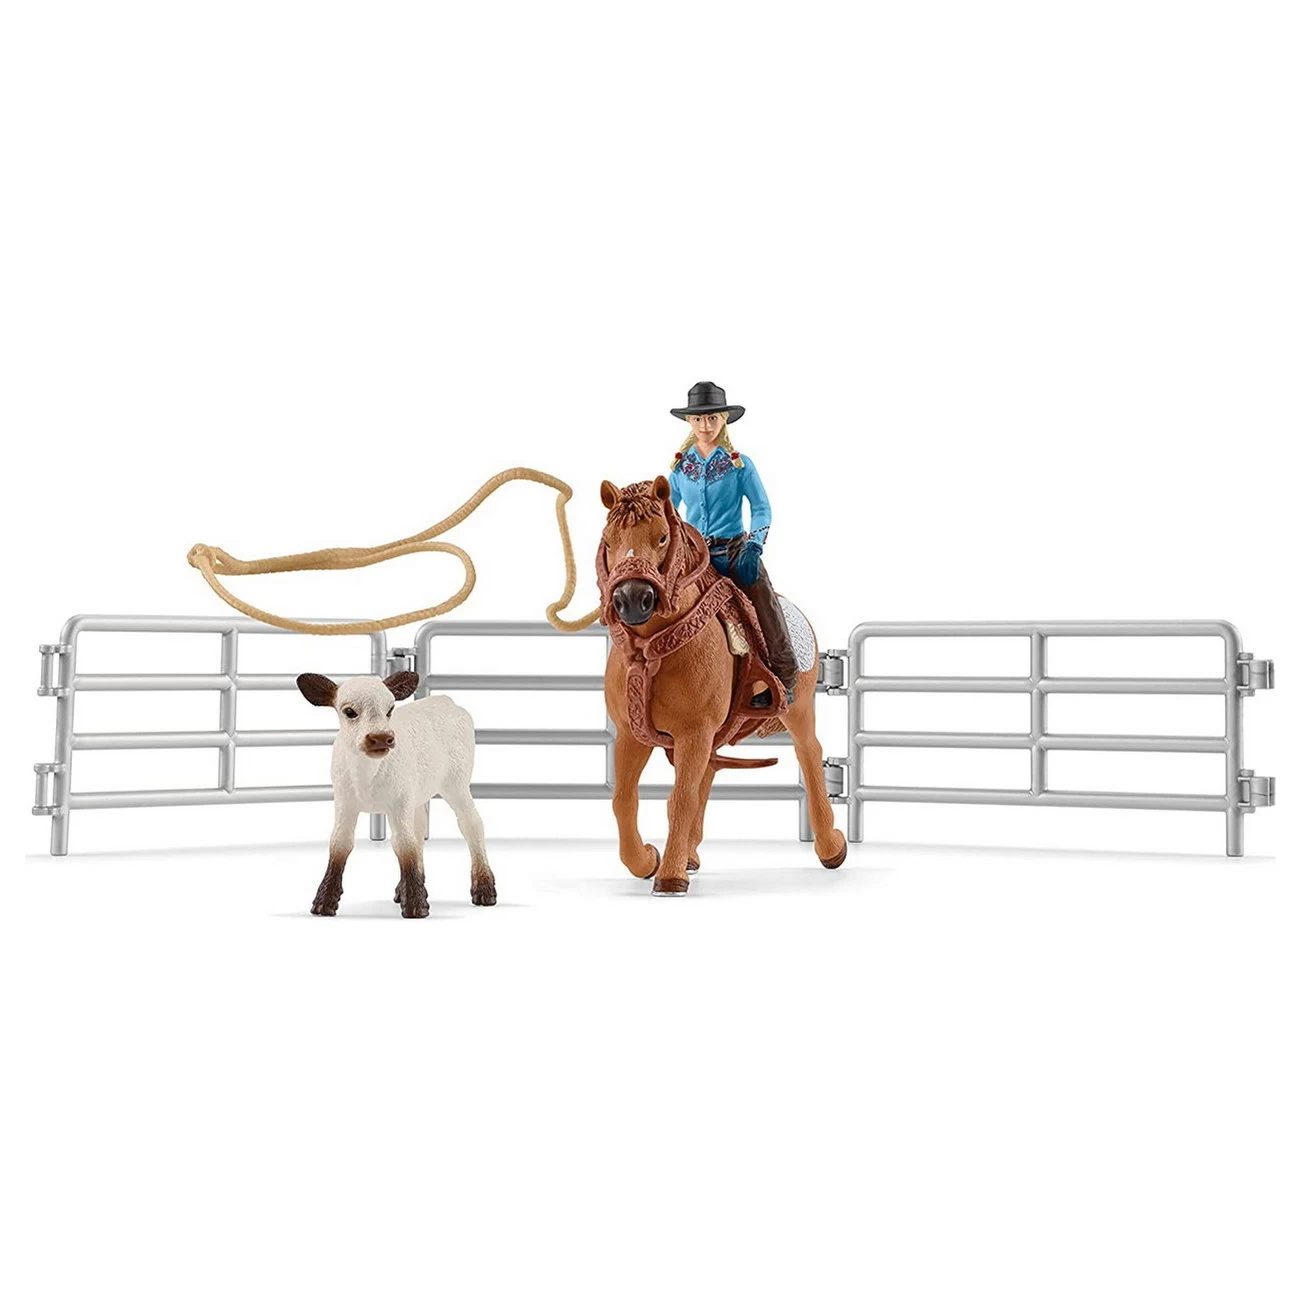 Team Roping mit Cowgirl (42577)